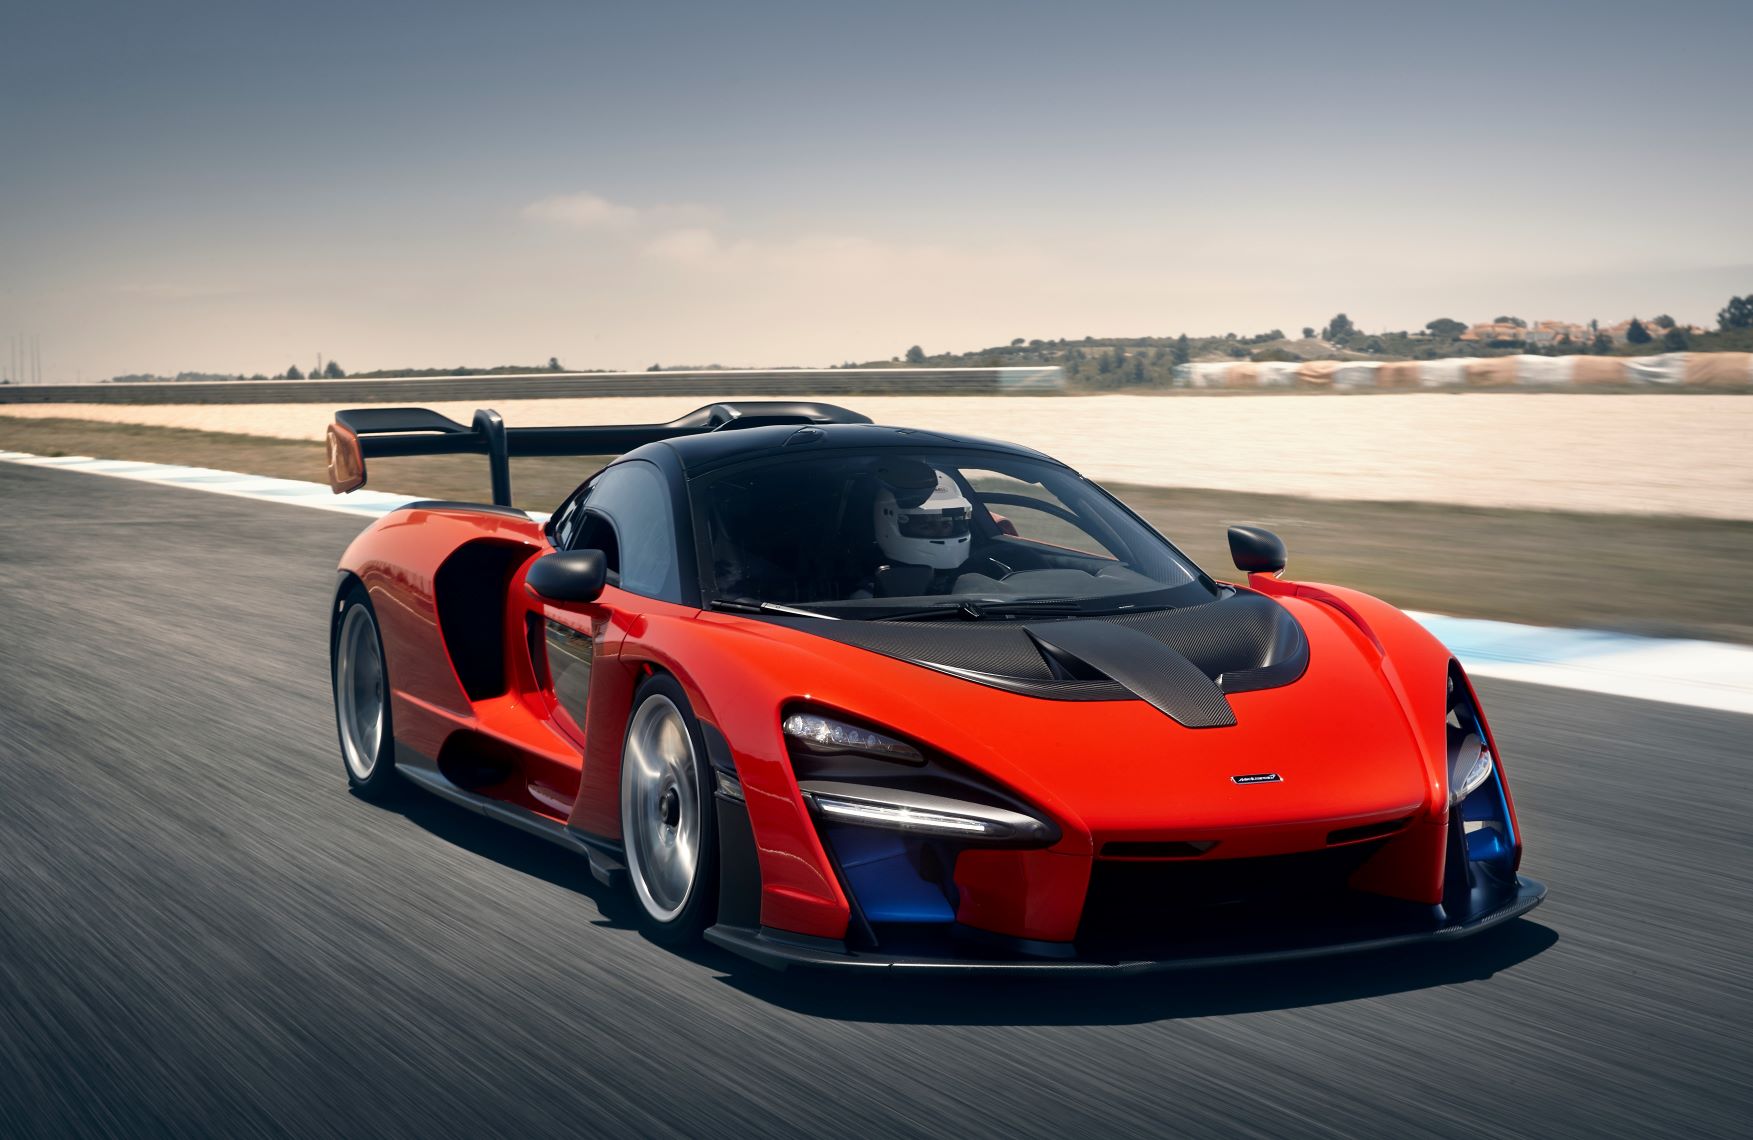 A circuit experience in the McLaren Senna, part II - Robb Report ...